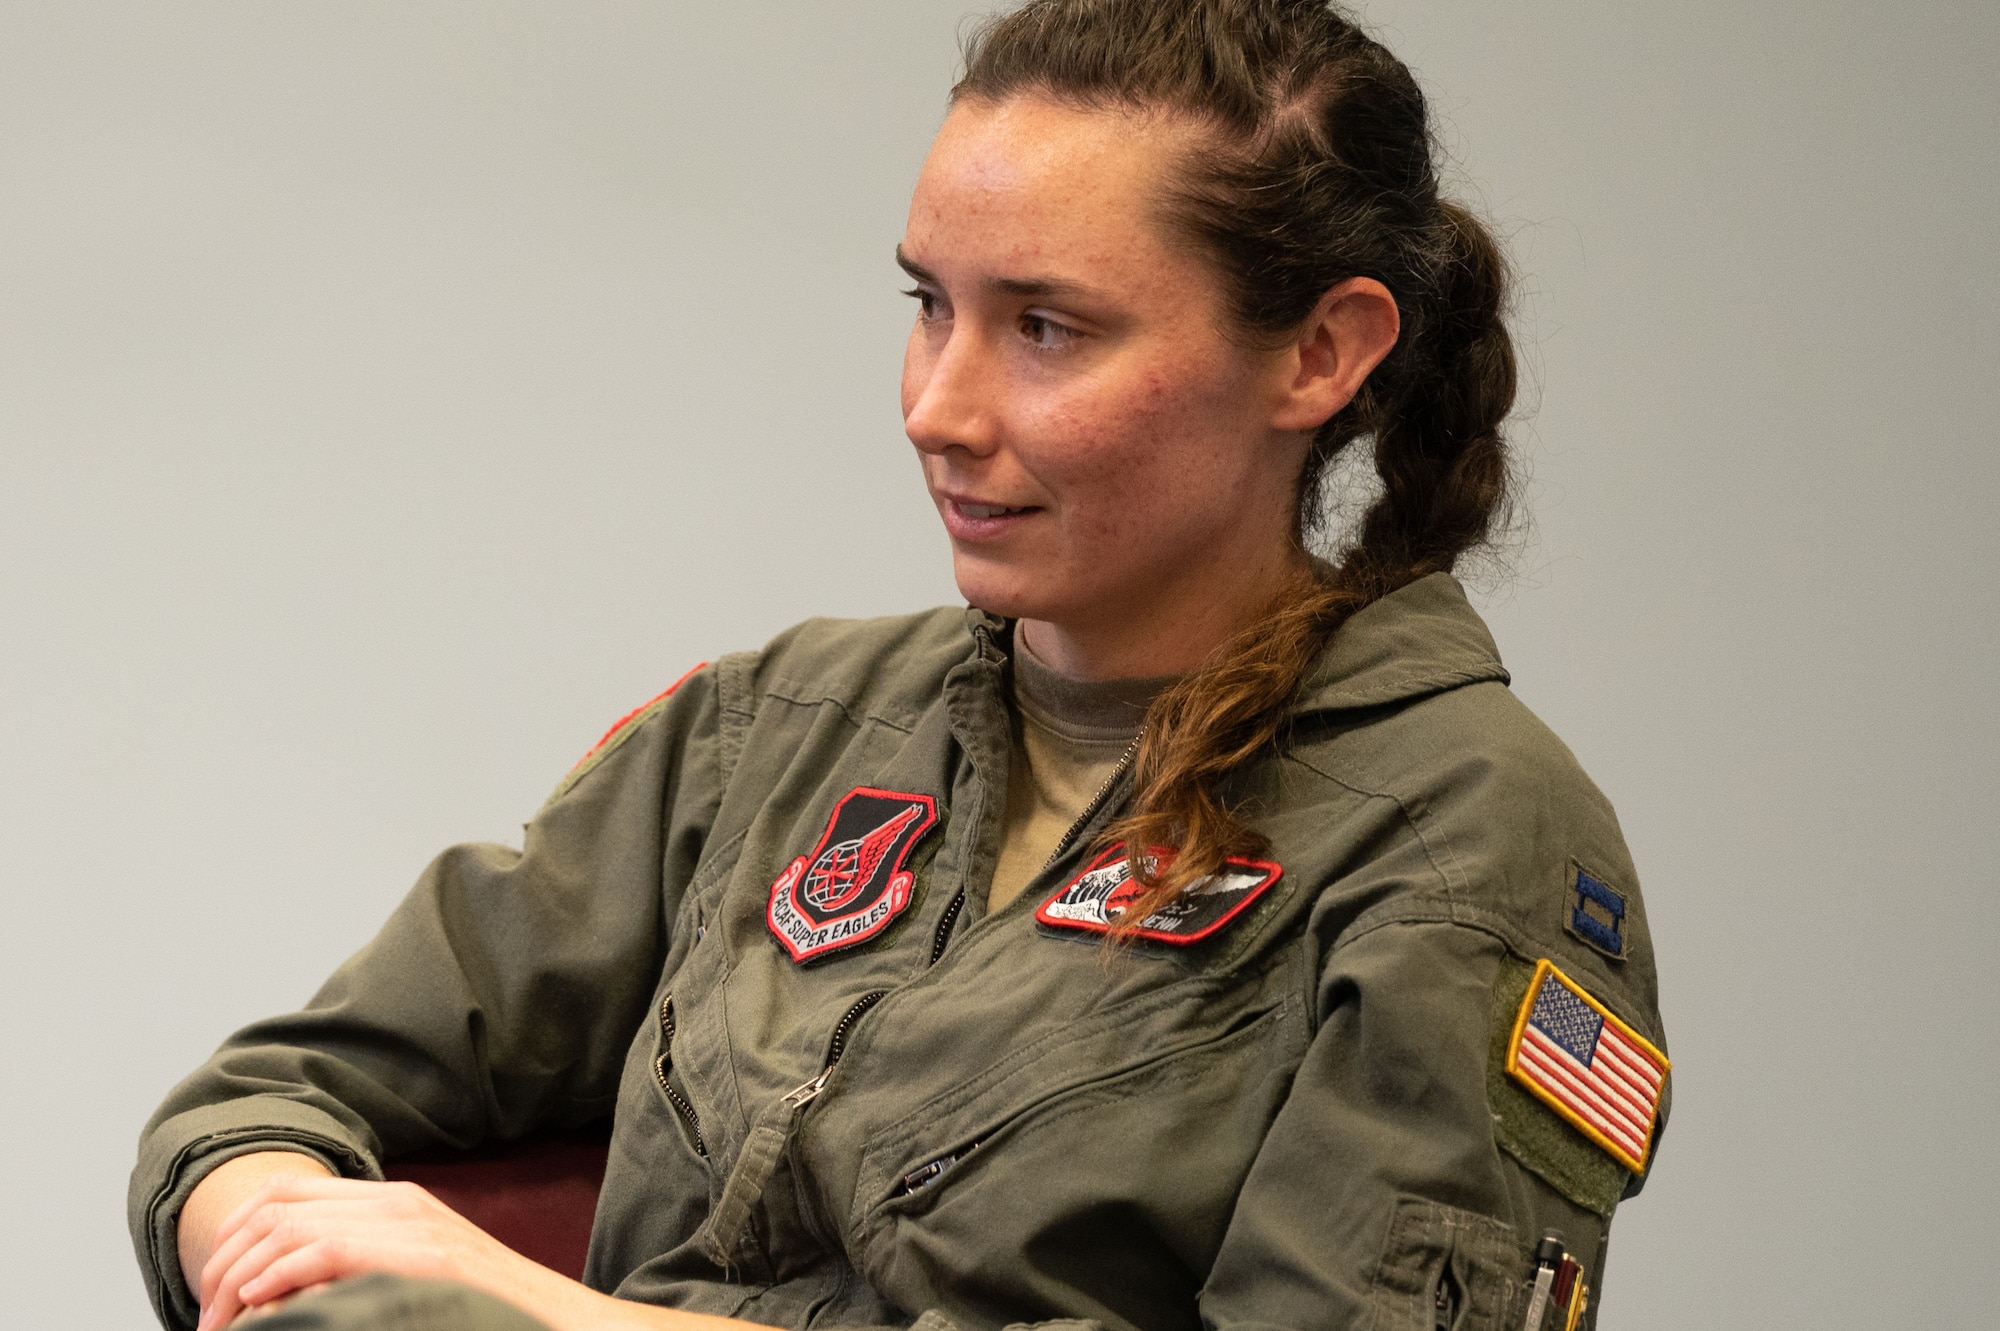 Air Force Aviation Inspiration and Mentors (AIM) and a sponsoring AIM wing visited youth at Johnson Youth Center in Juneau, Alaska, from Sept. 5 to 7 during an Alaska-based recruiting zone blitz.